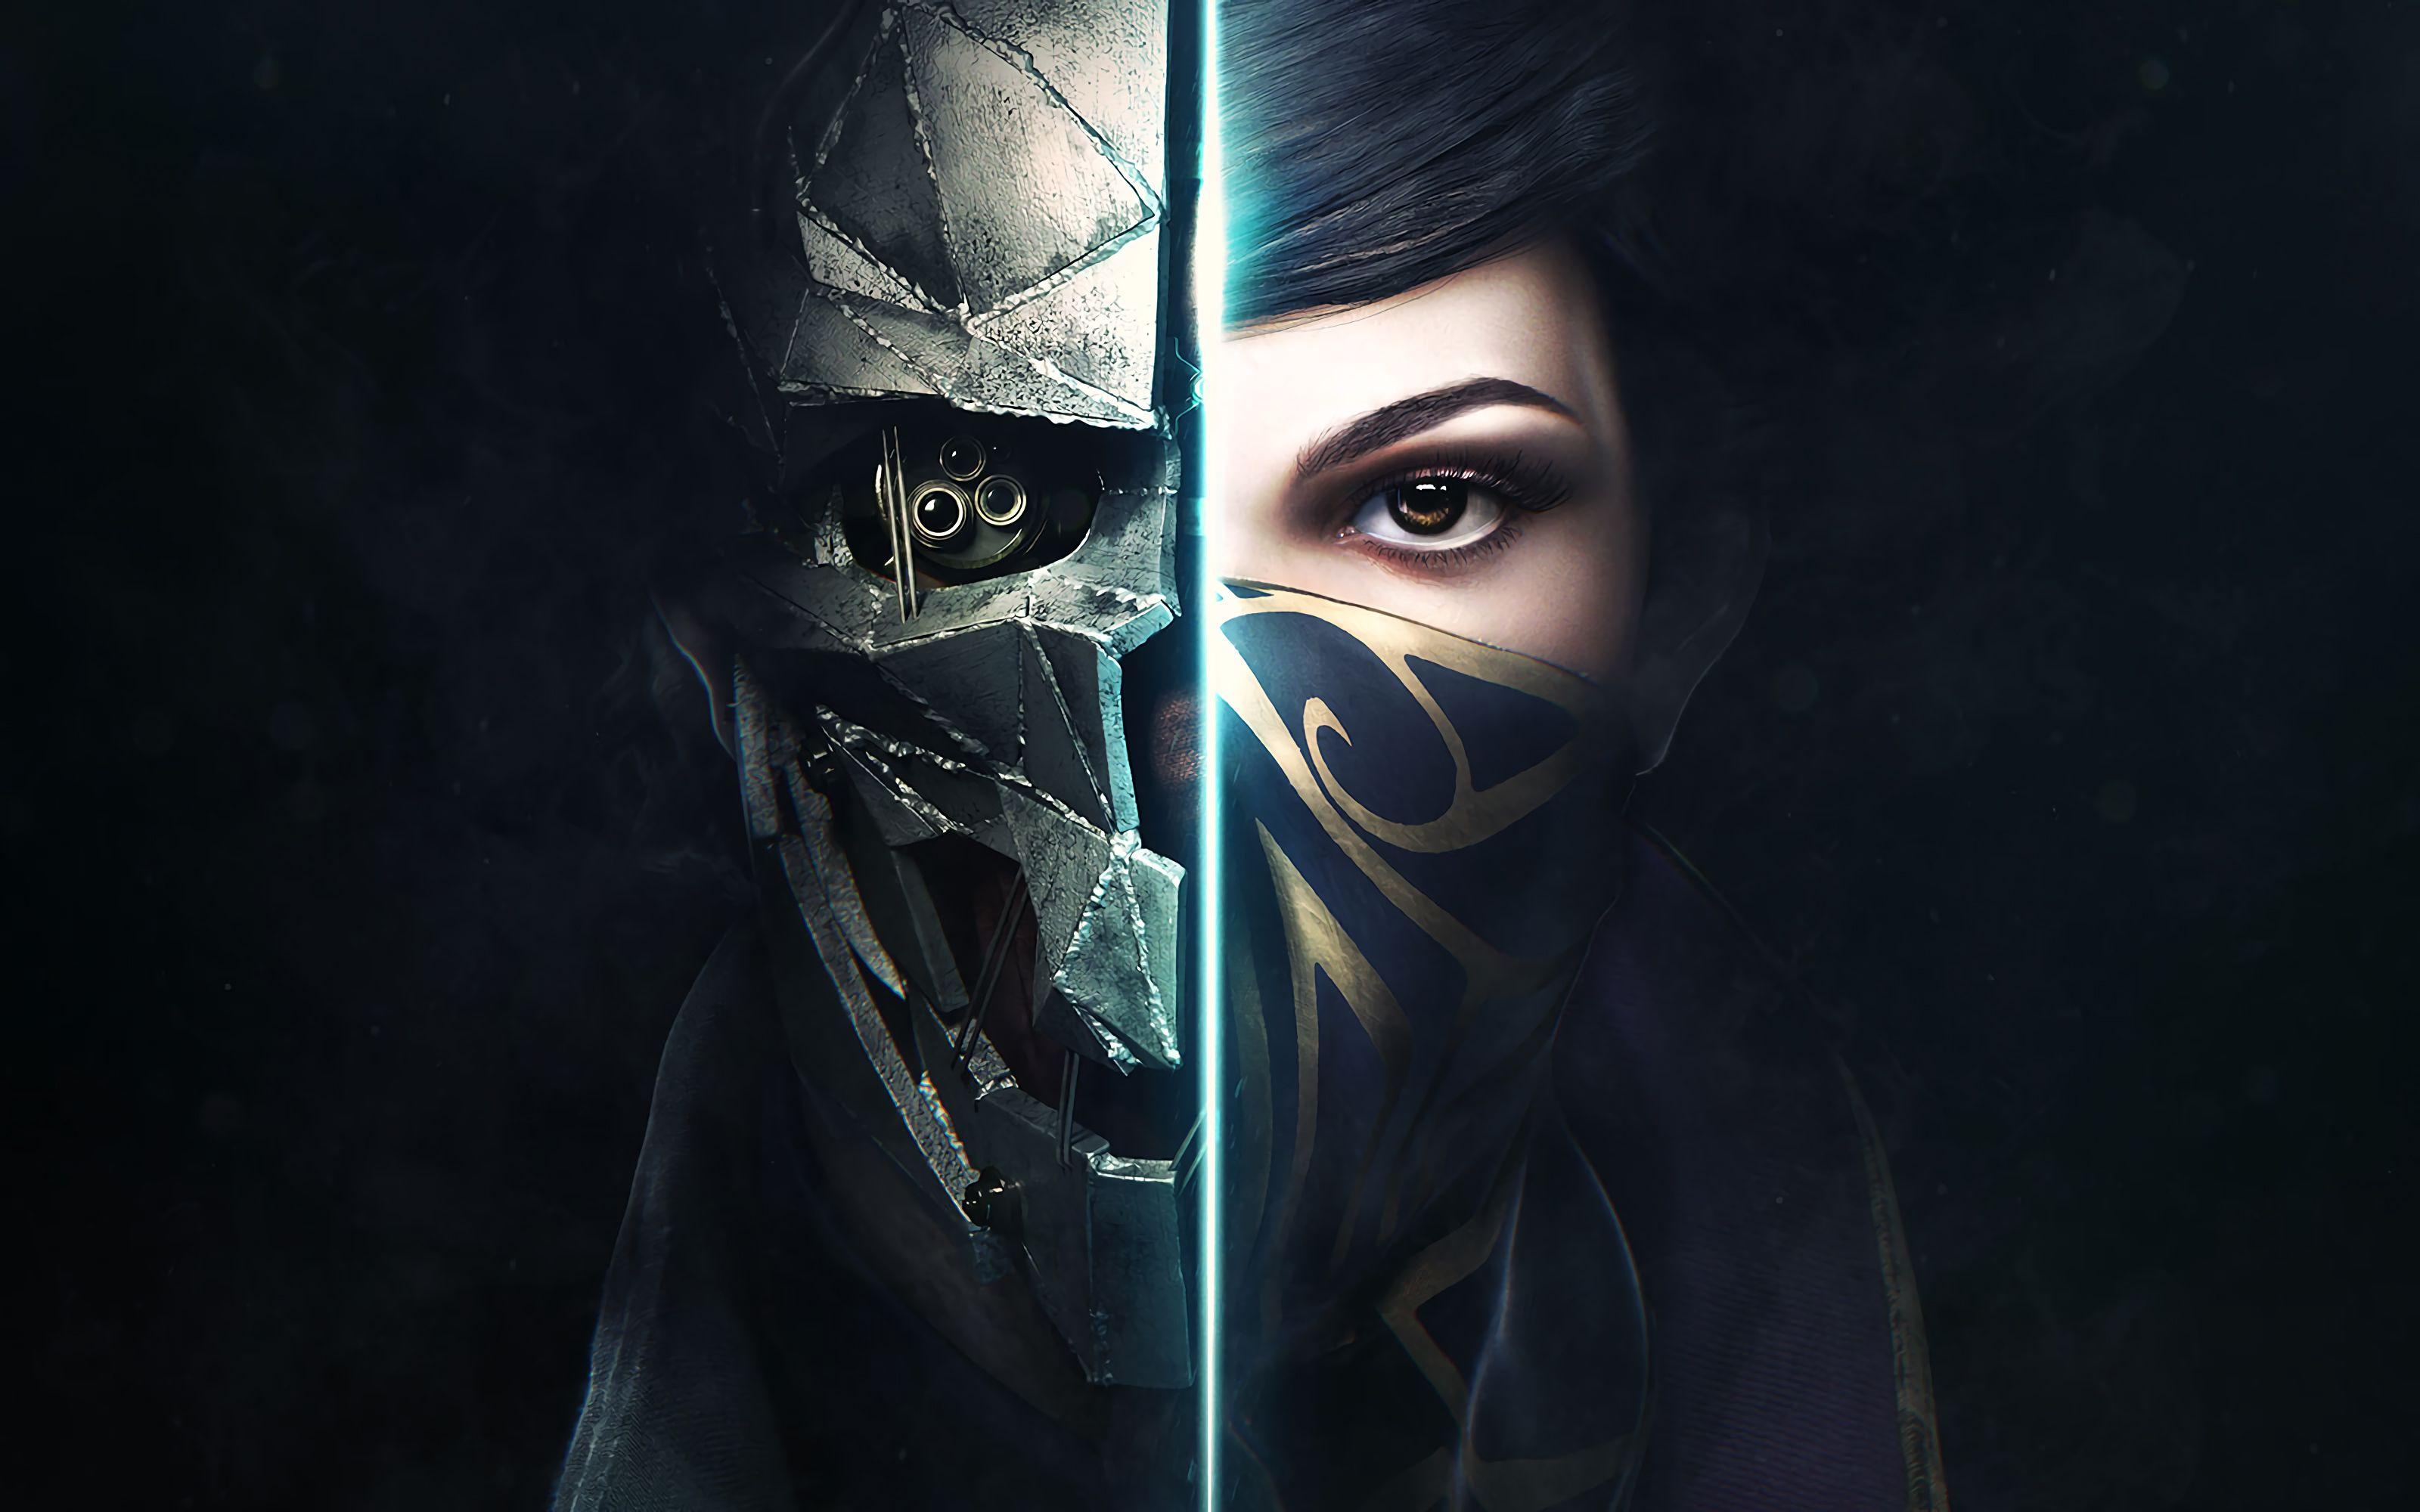 Dishonored 2 Wallpaper